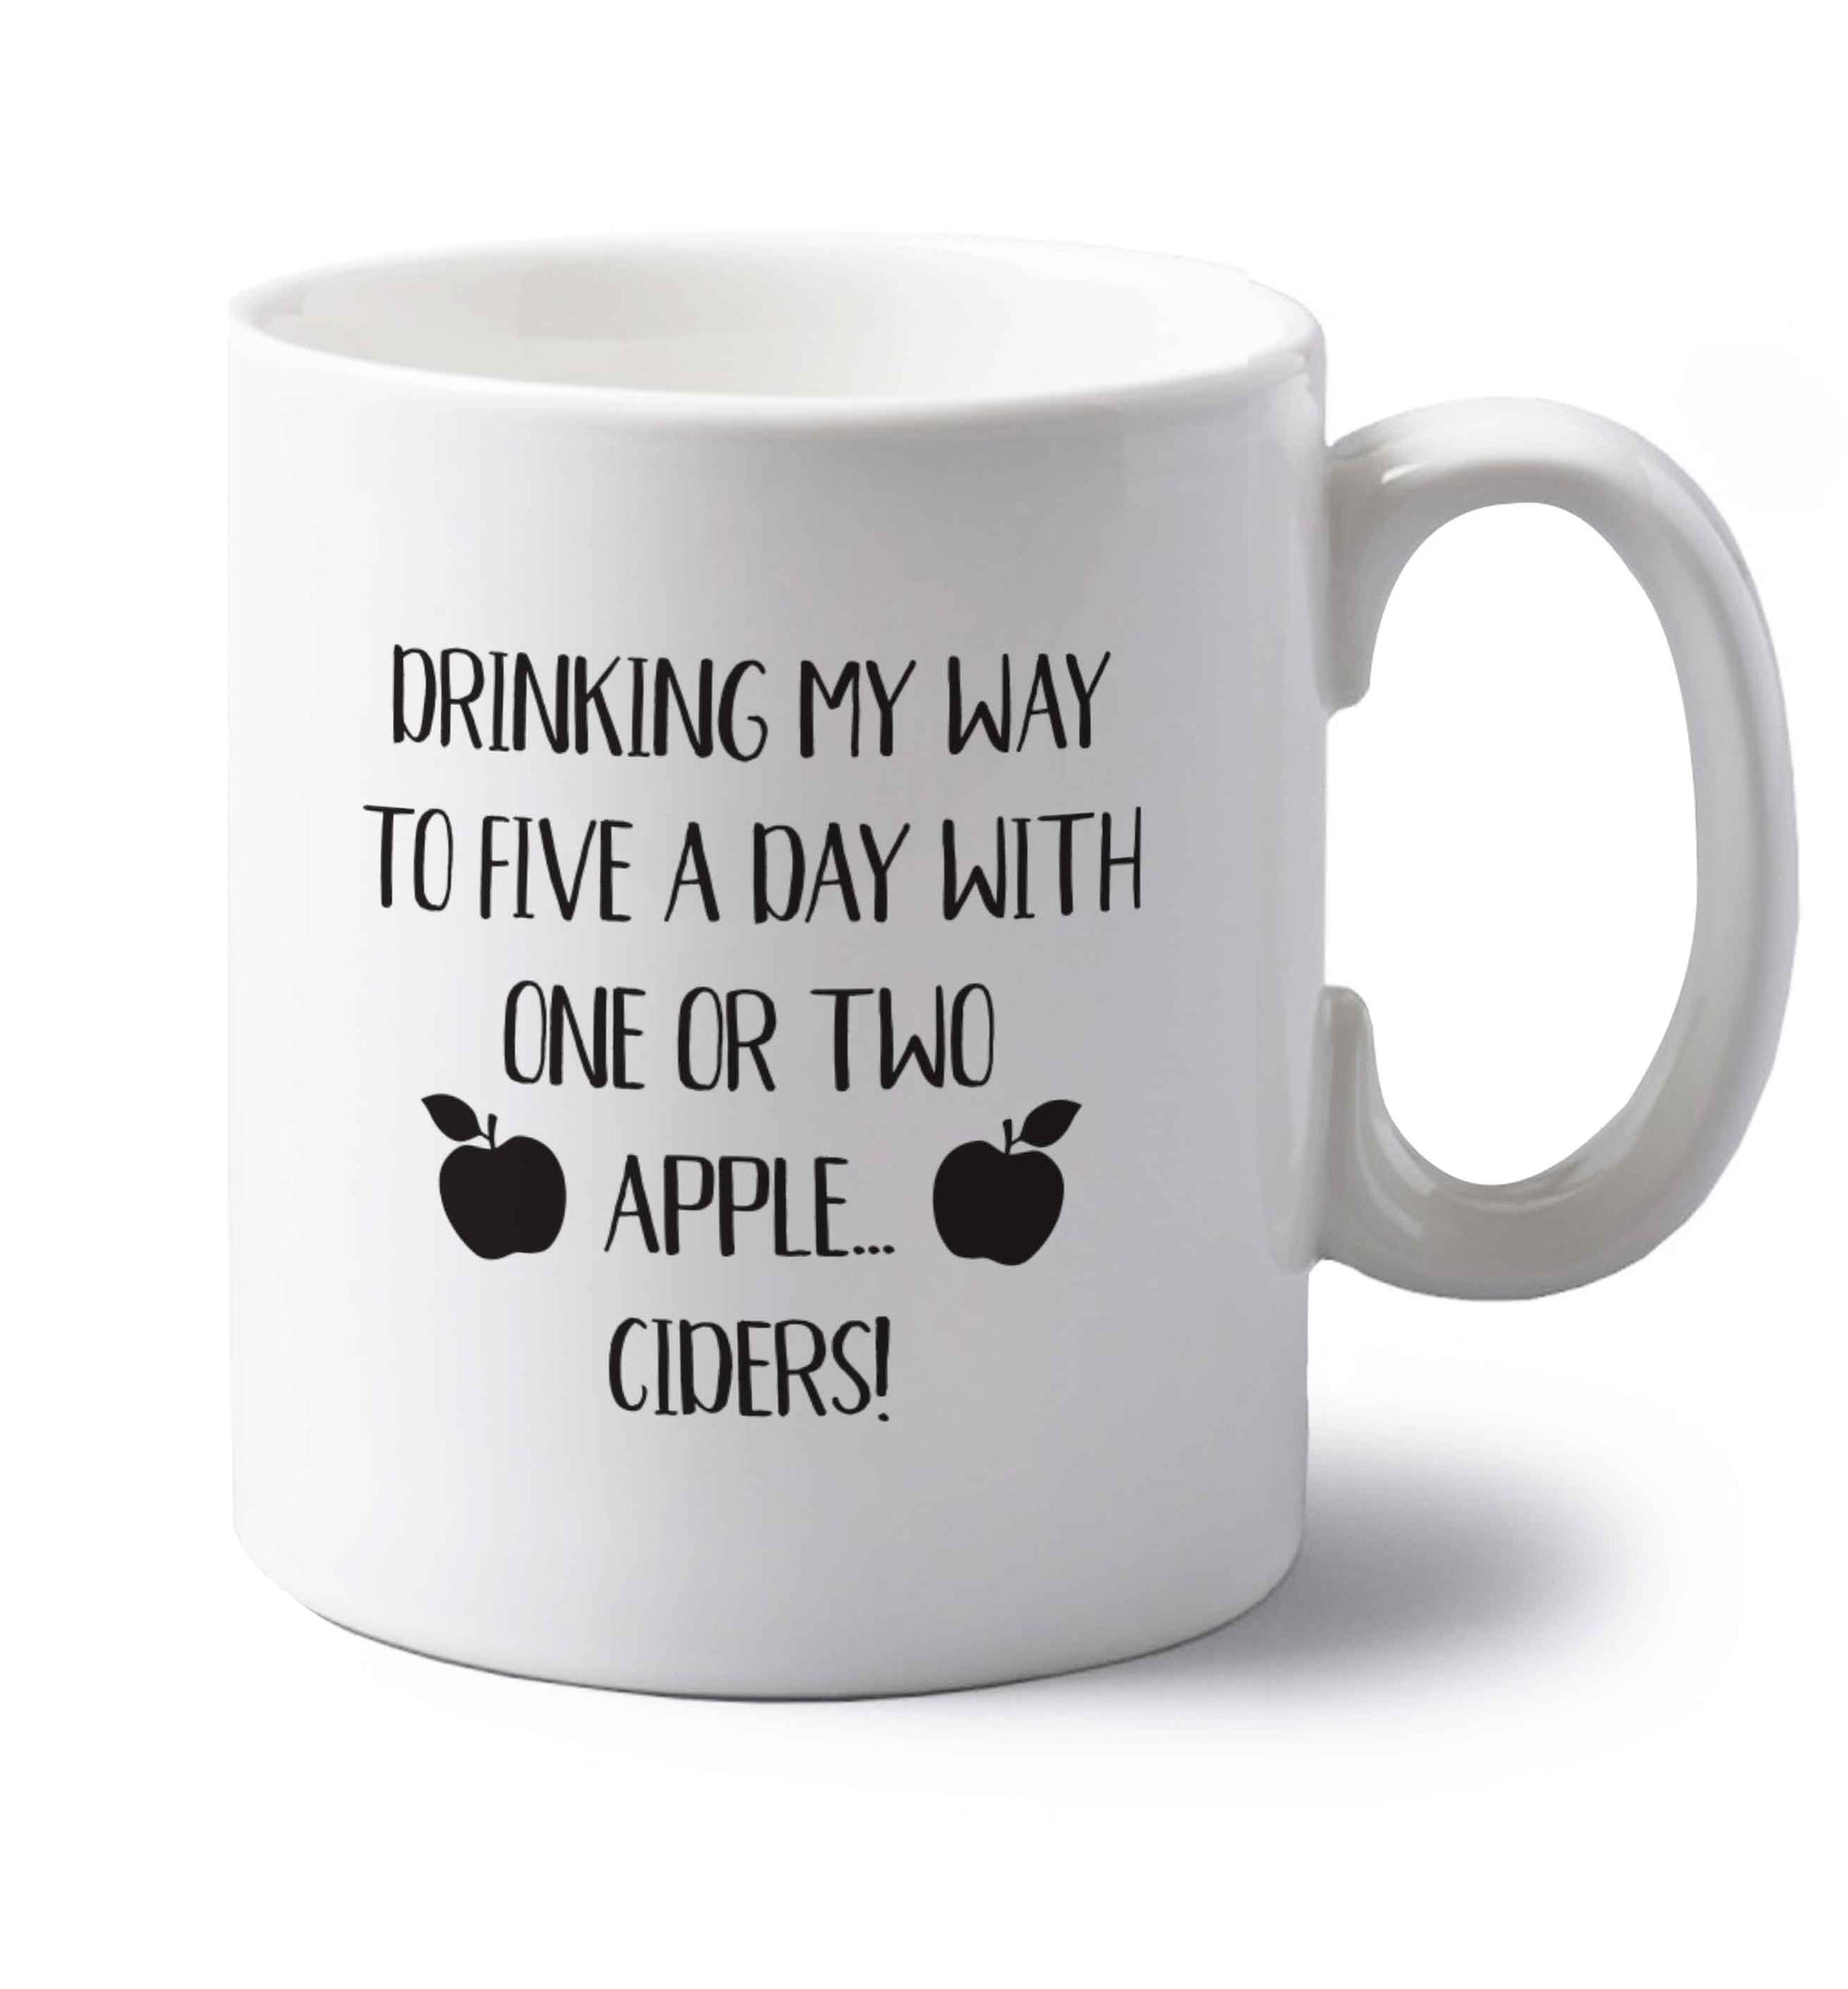 Drinking my way to five a day with one or two apple ciders left handed white ceramic mug 